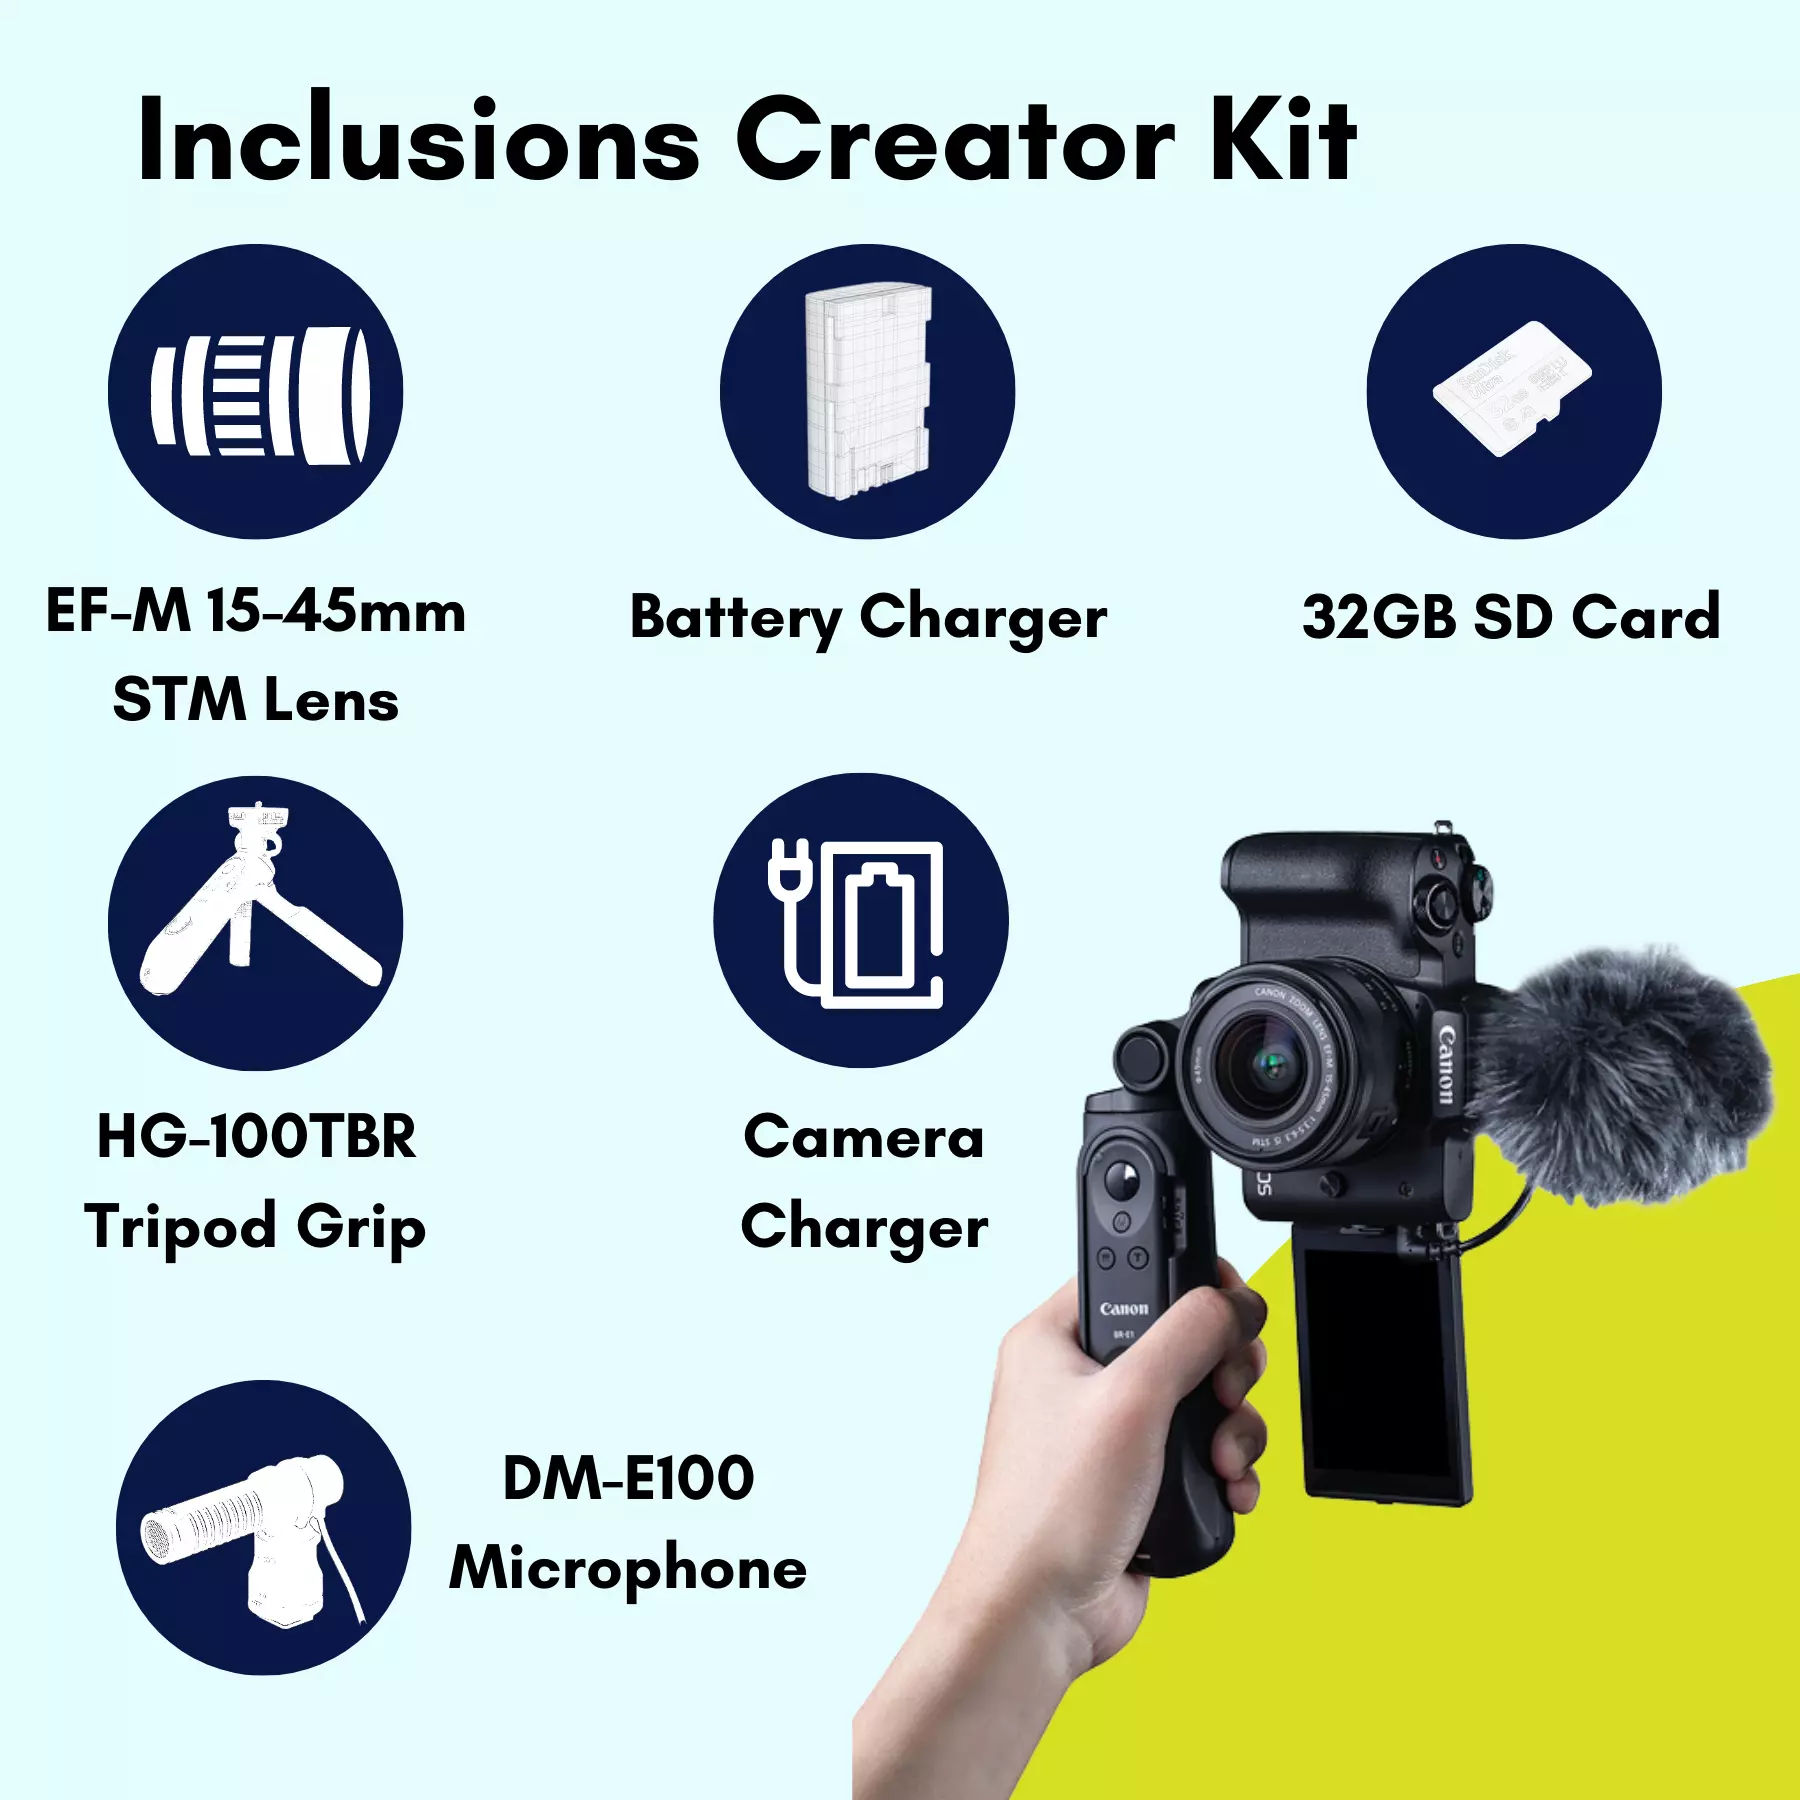 These are product images of Canon M50 Mark II with Creator Kit on rent by SharePal.